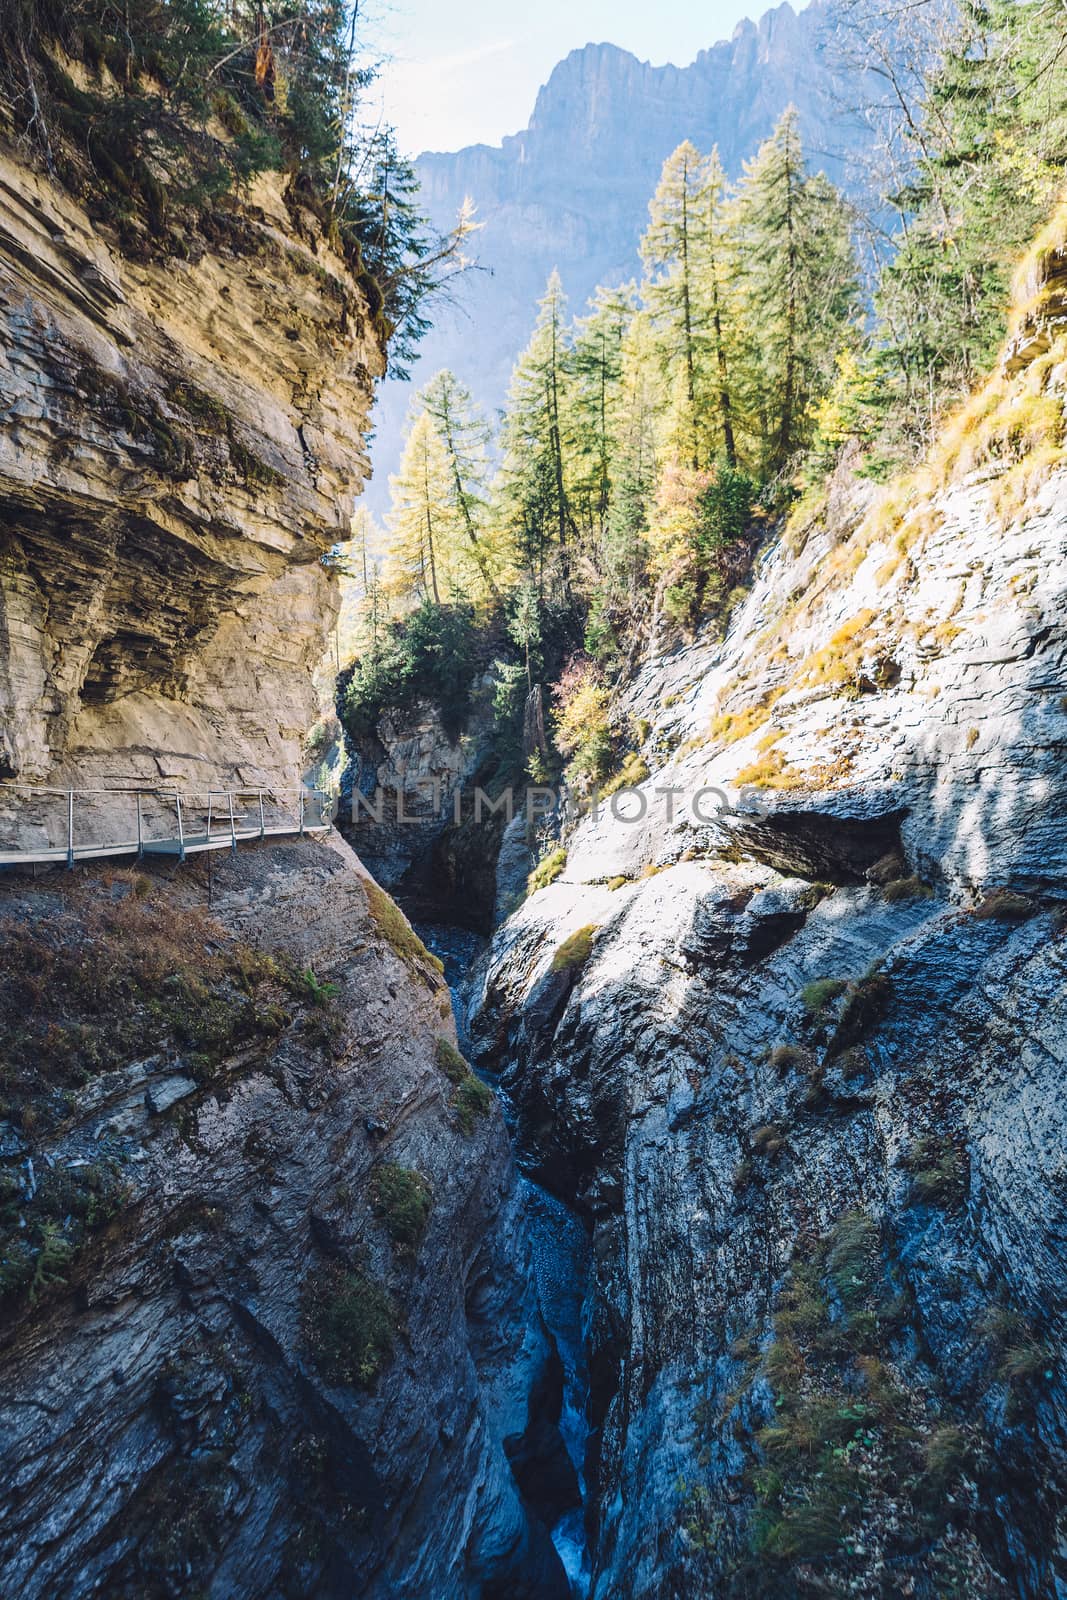 The Leukerbad themal springs gorge during fall.